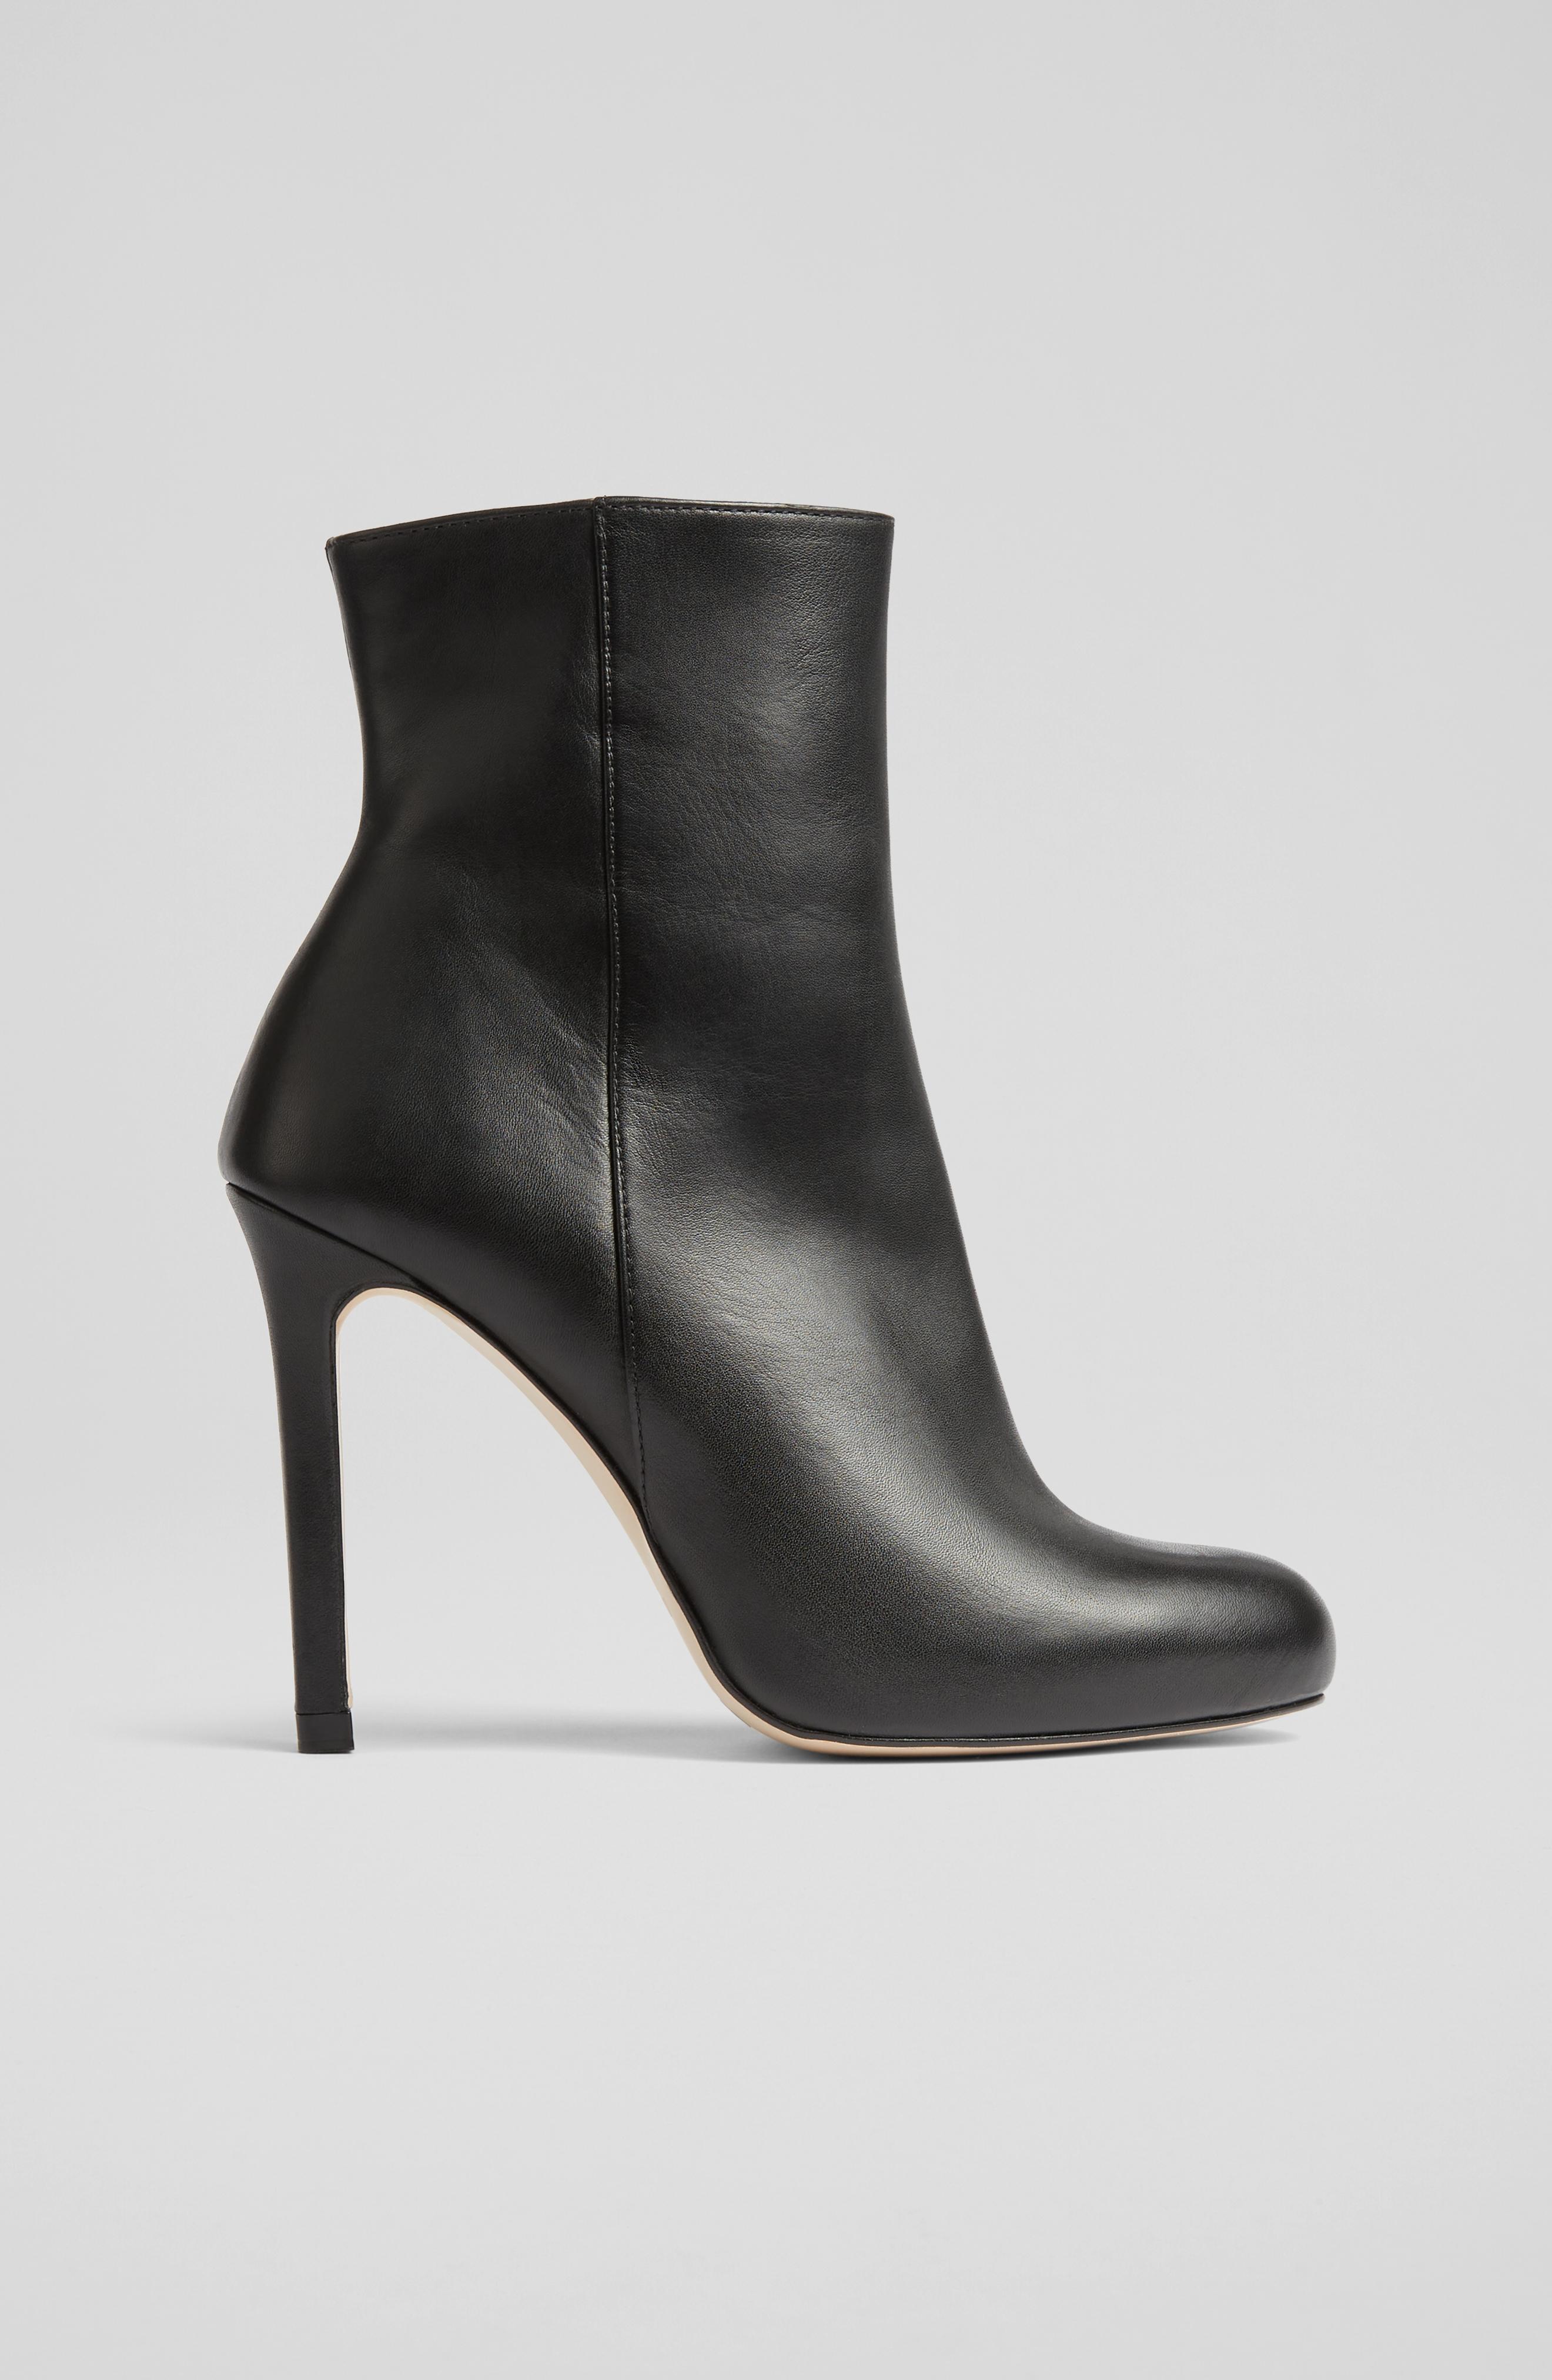 3 Details to Look for When Investing in a Black Ankle Boot | The UNDONE